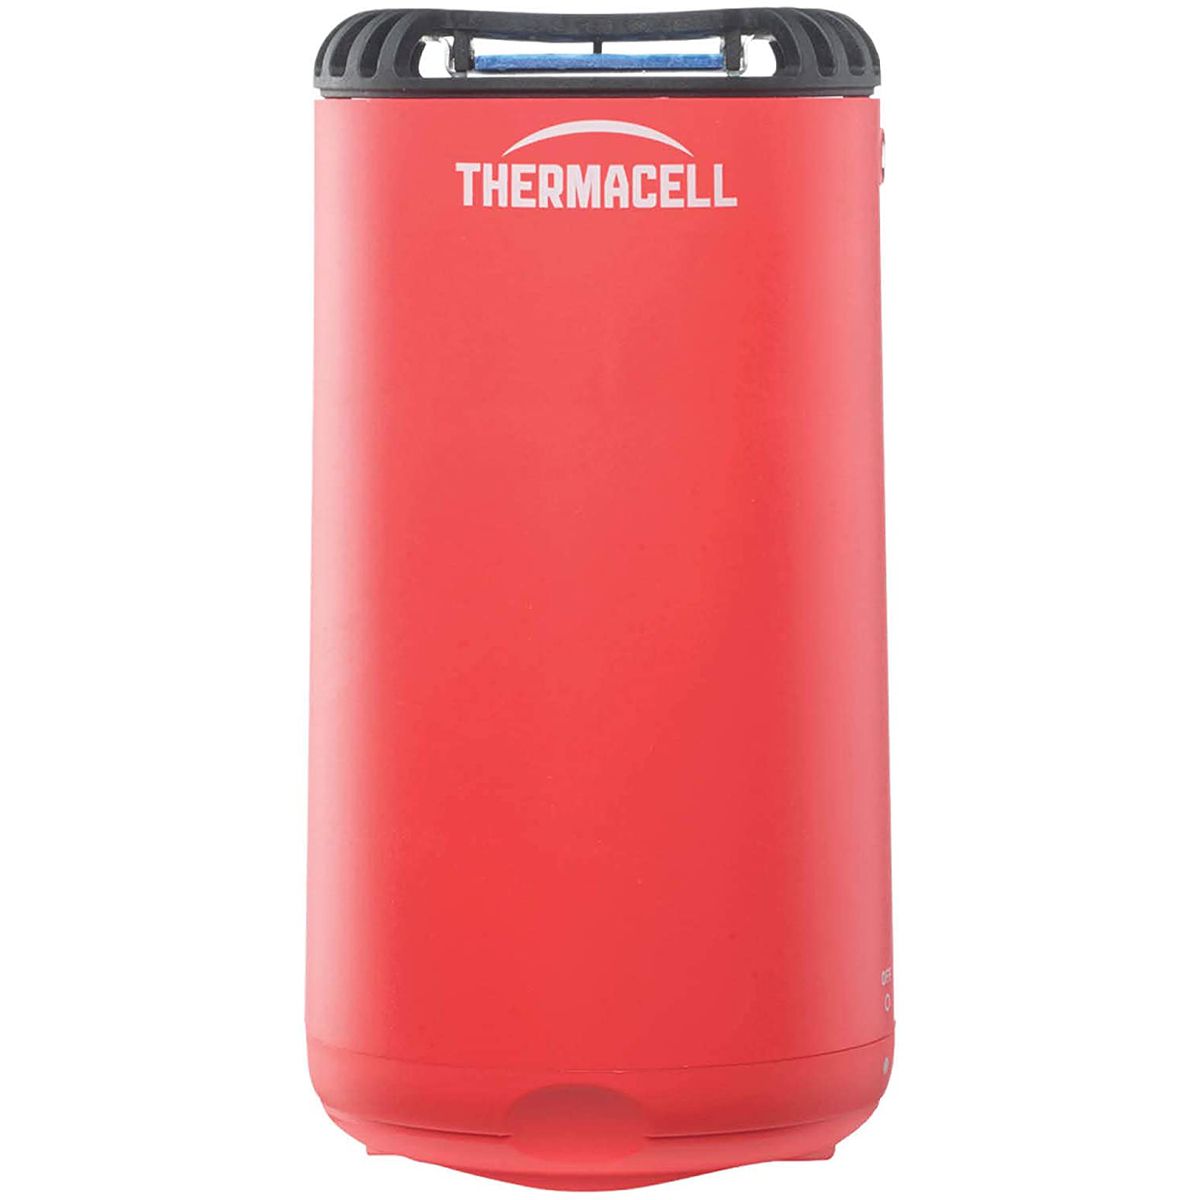 Thermacell Patio Shield Mosquito Repellent